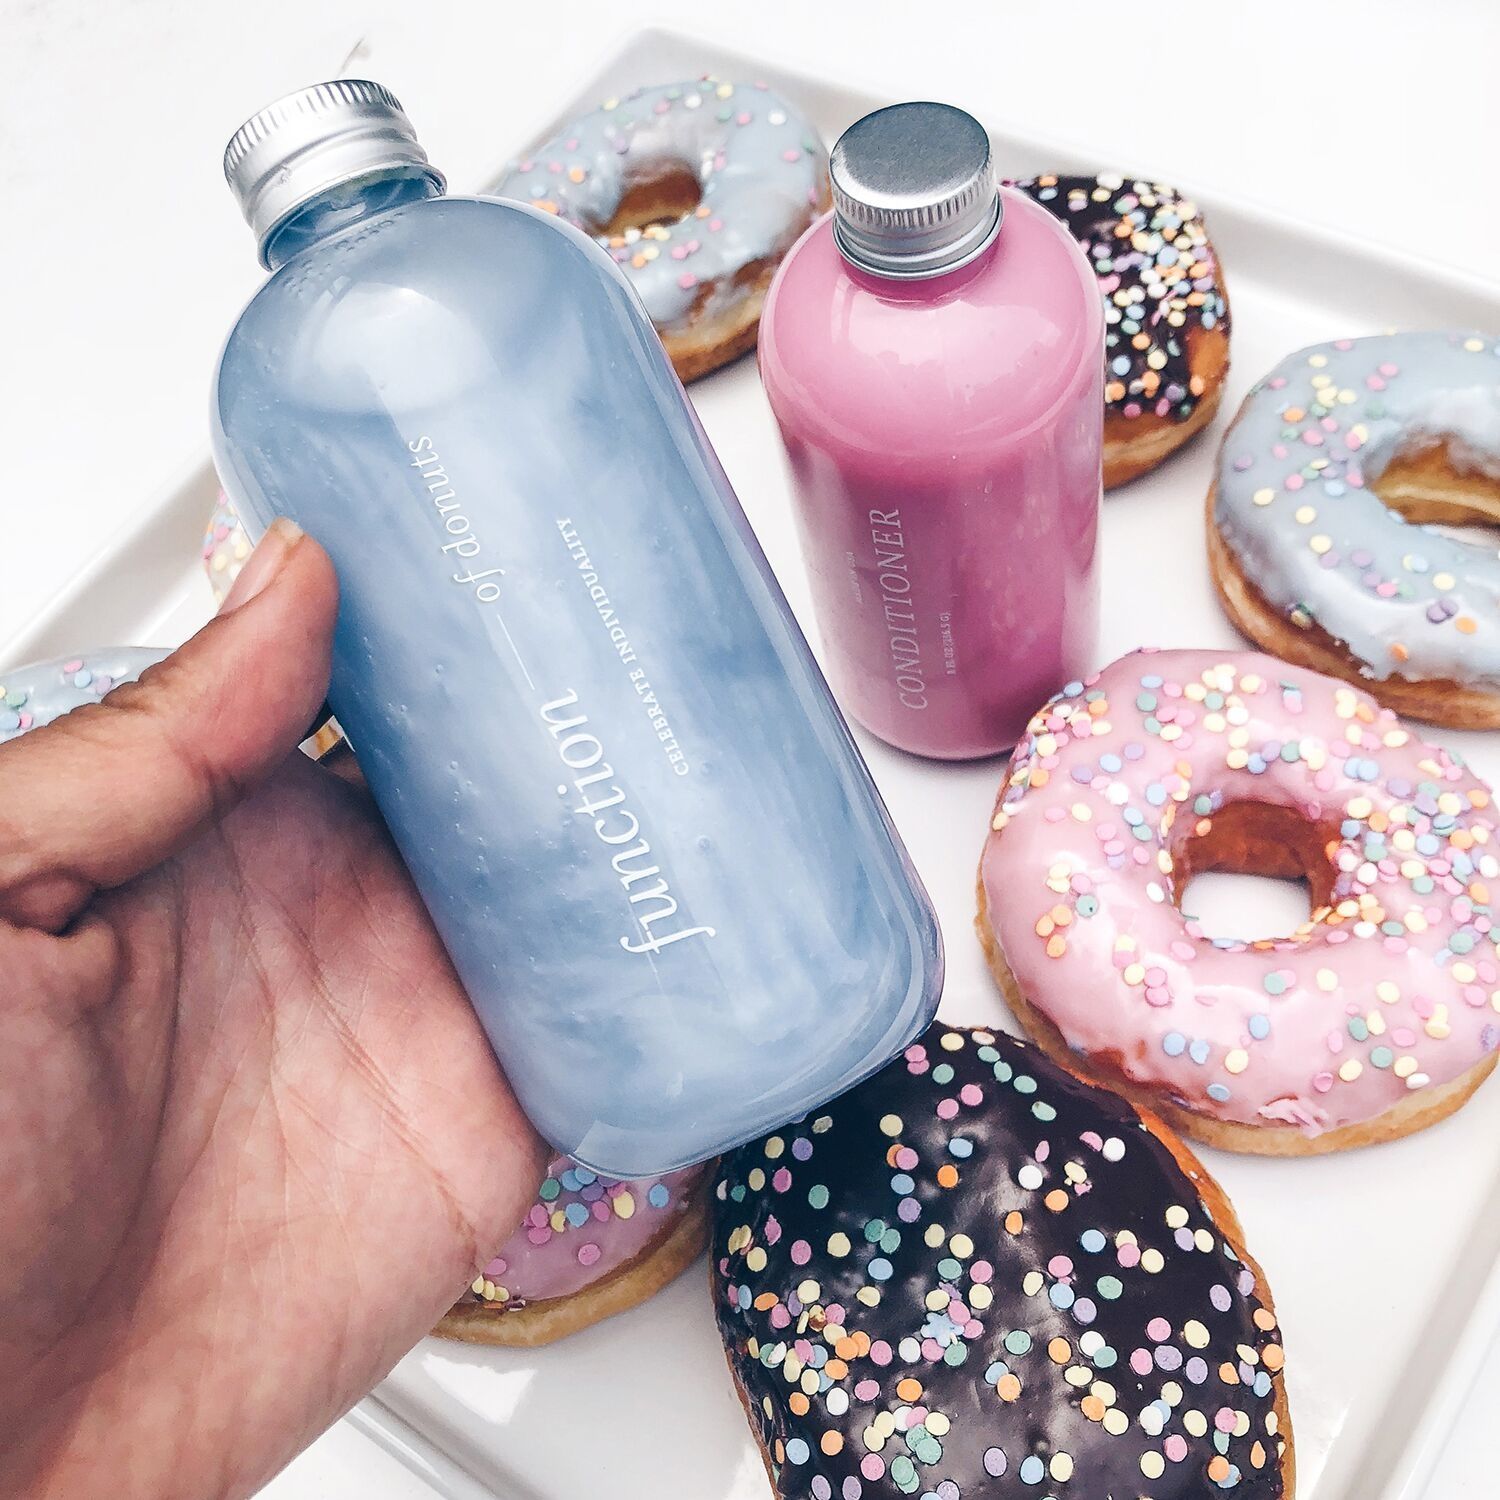 A hand holds a blue FOB haircare bottle in front of colorful donuts